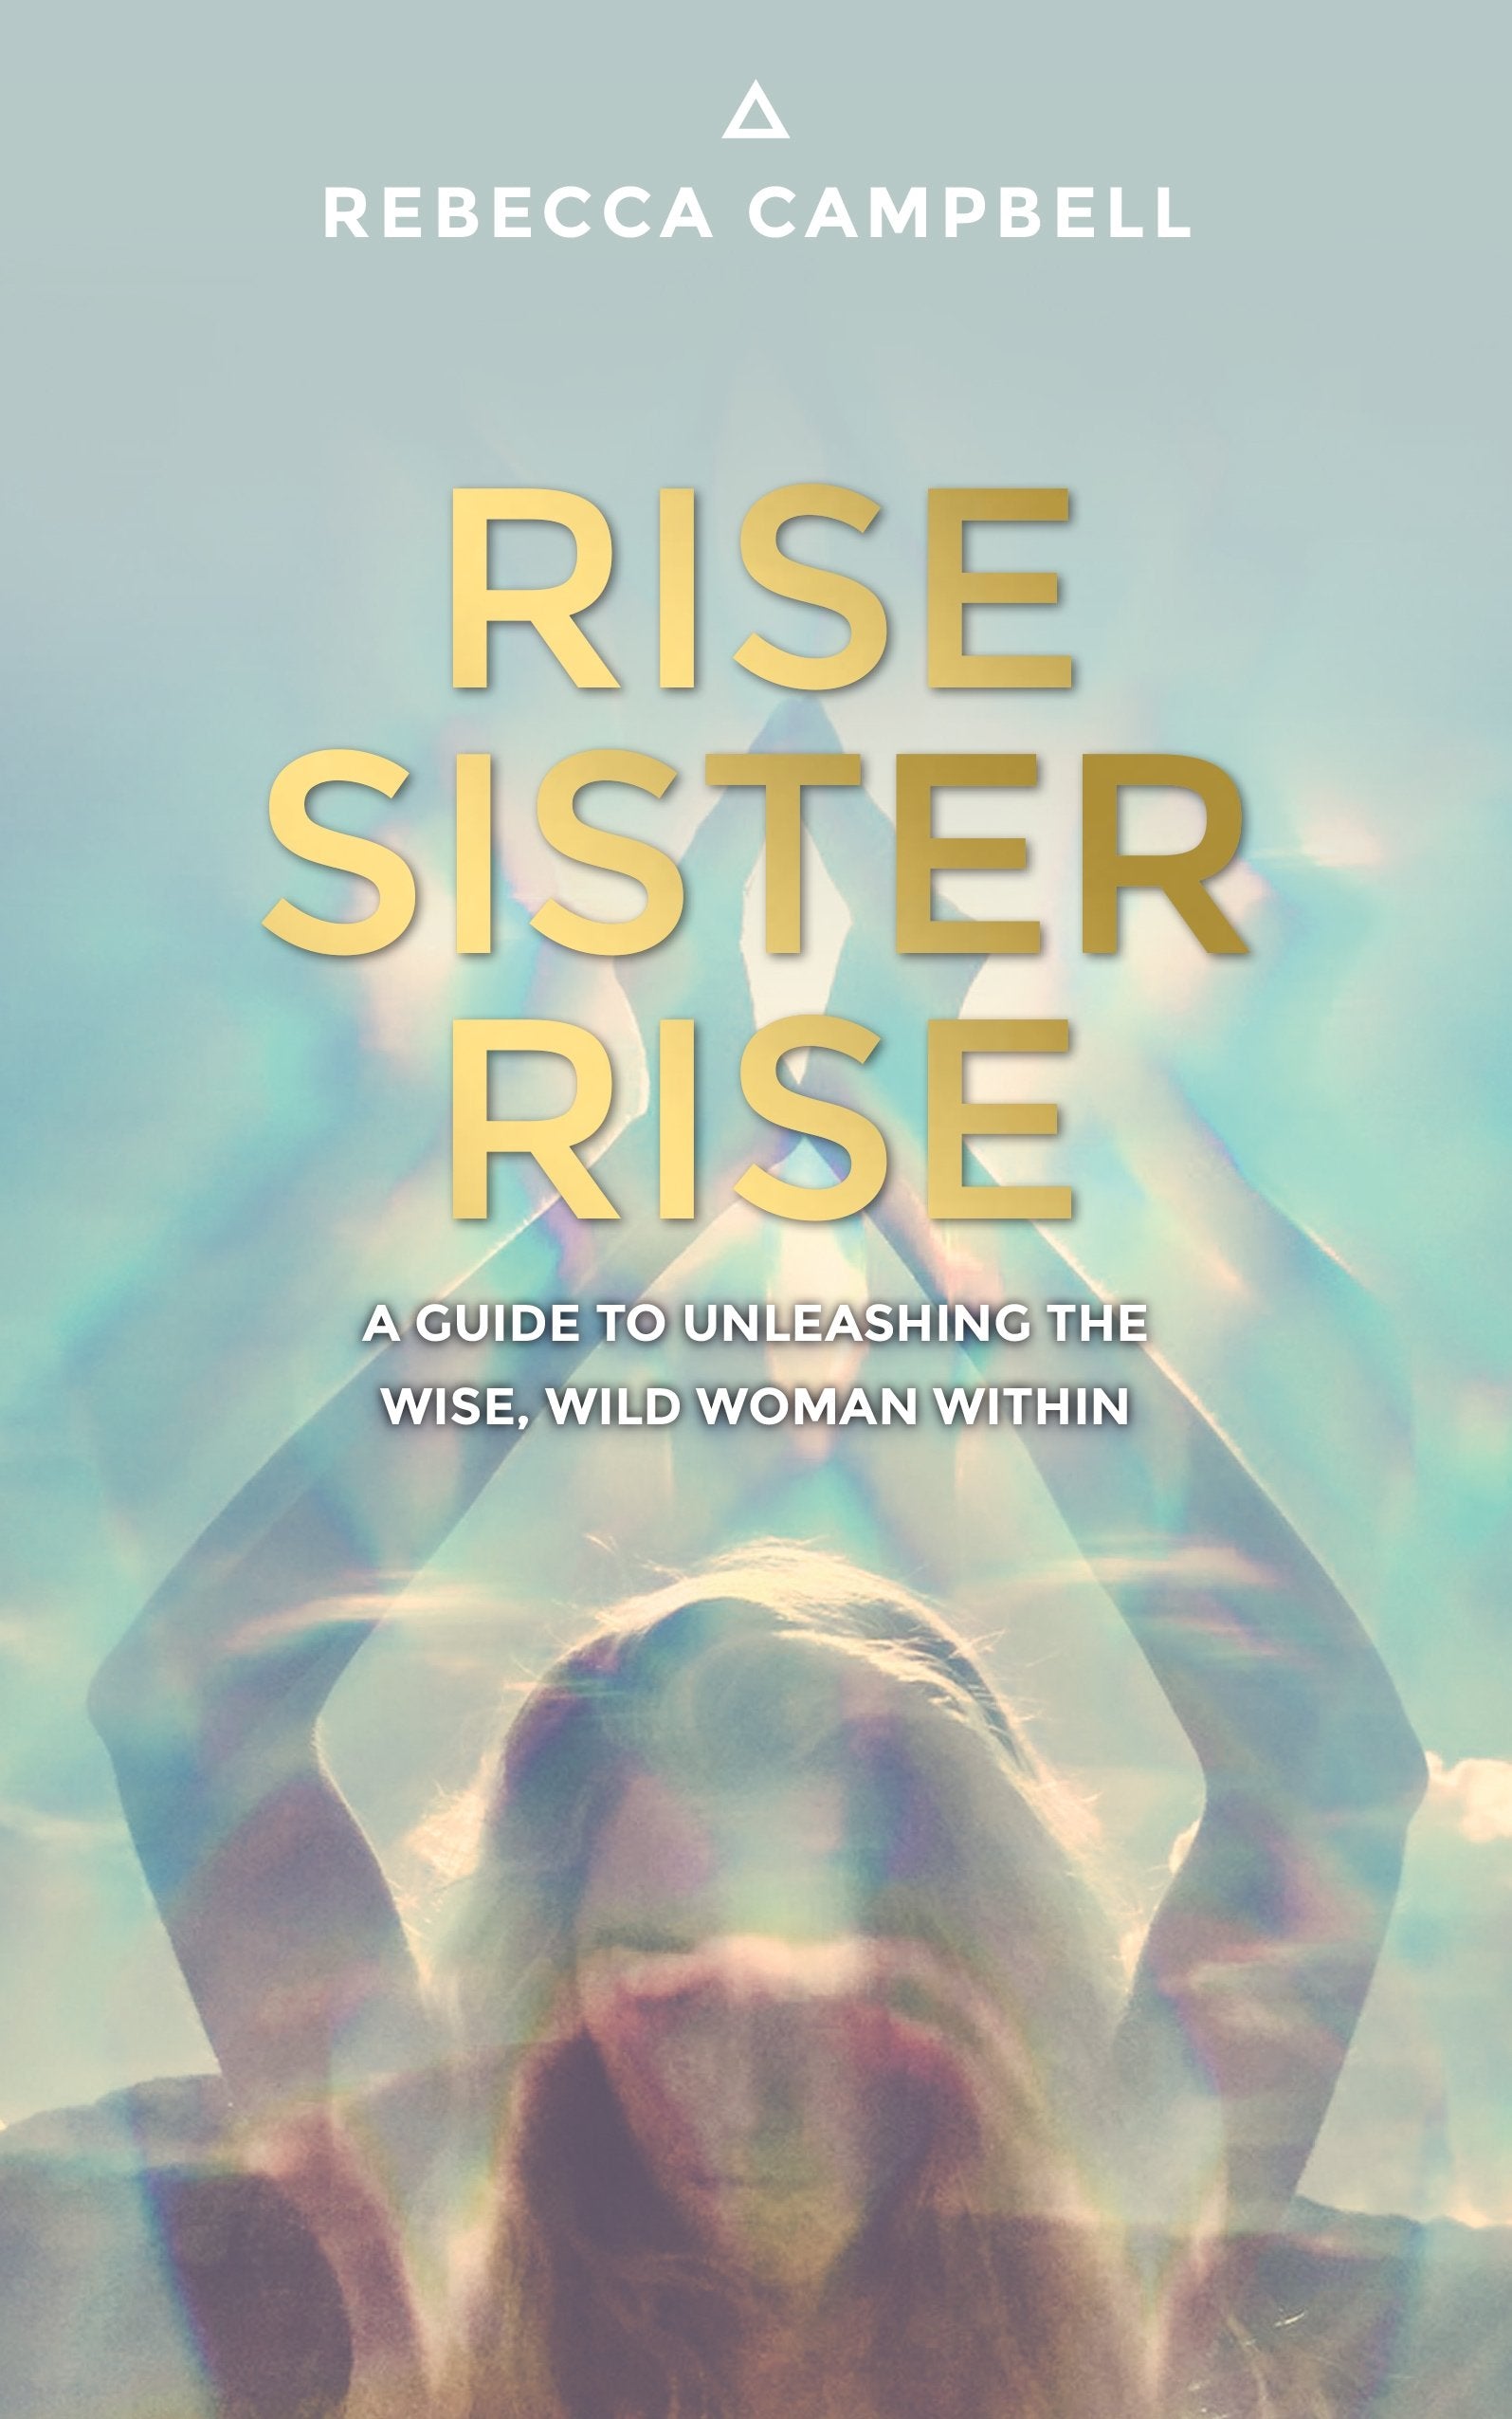 Rise Sister Rise: A Guide to Unleashing the Wise, Wild Woman Within || Rebecca Campbell (Paperback)